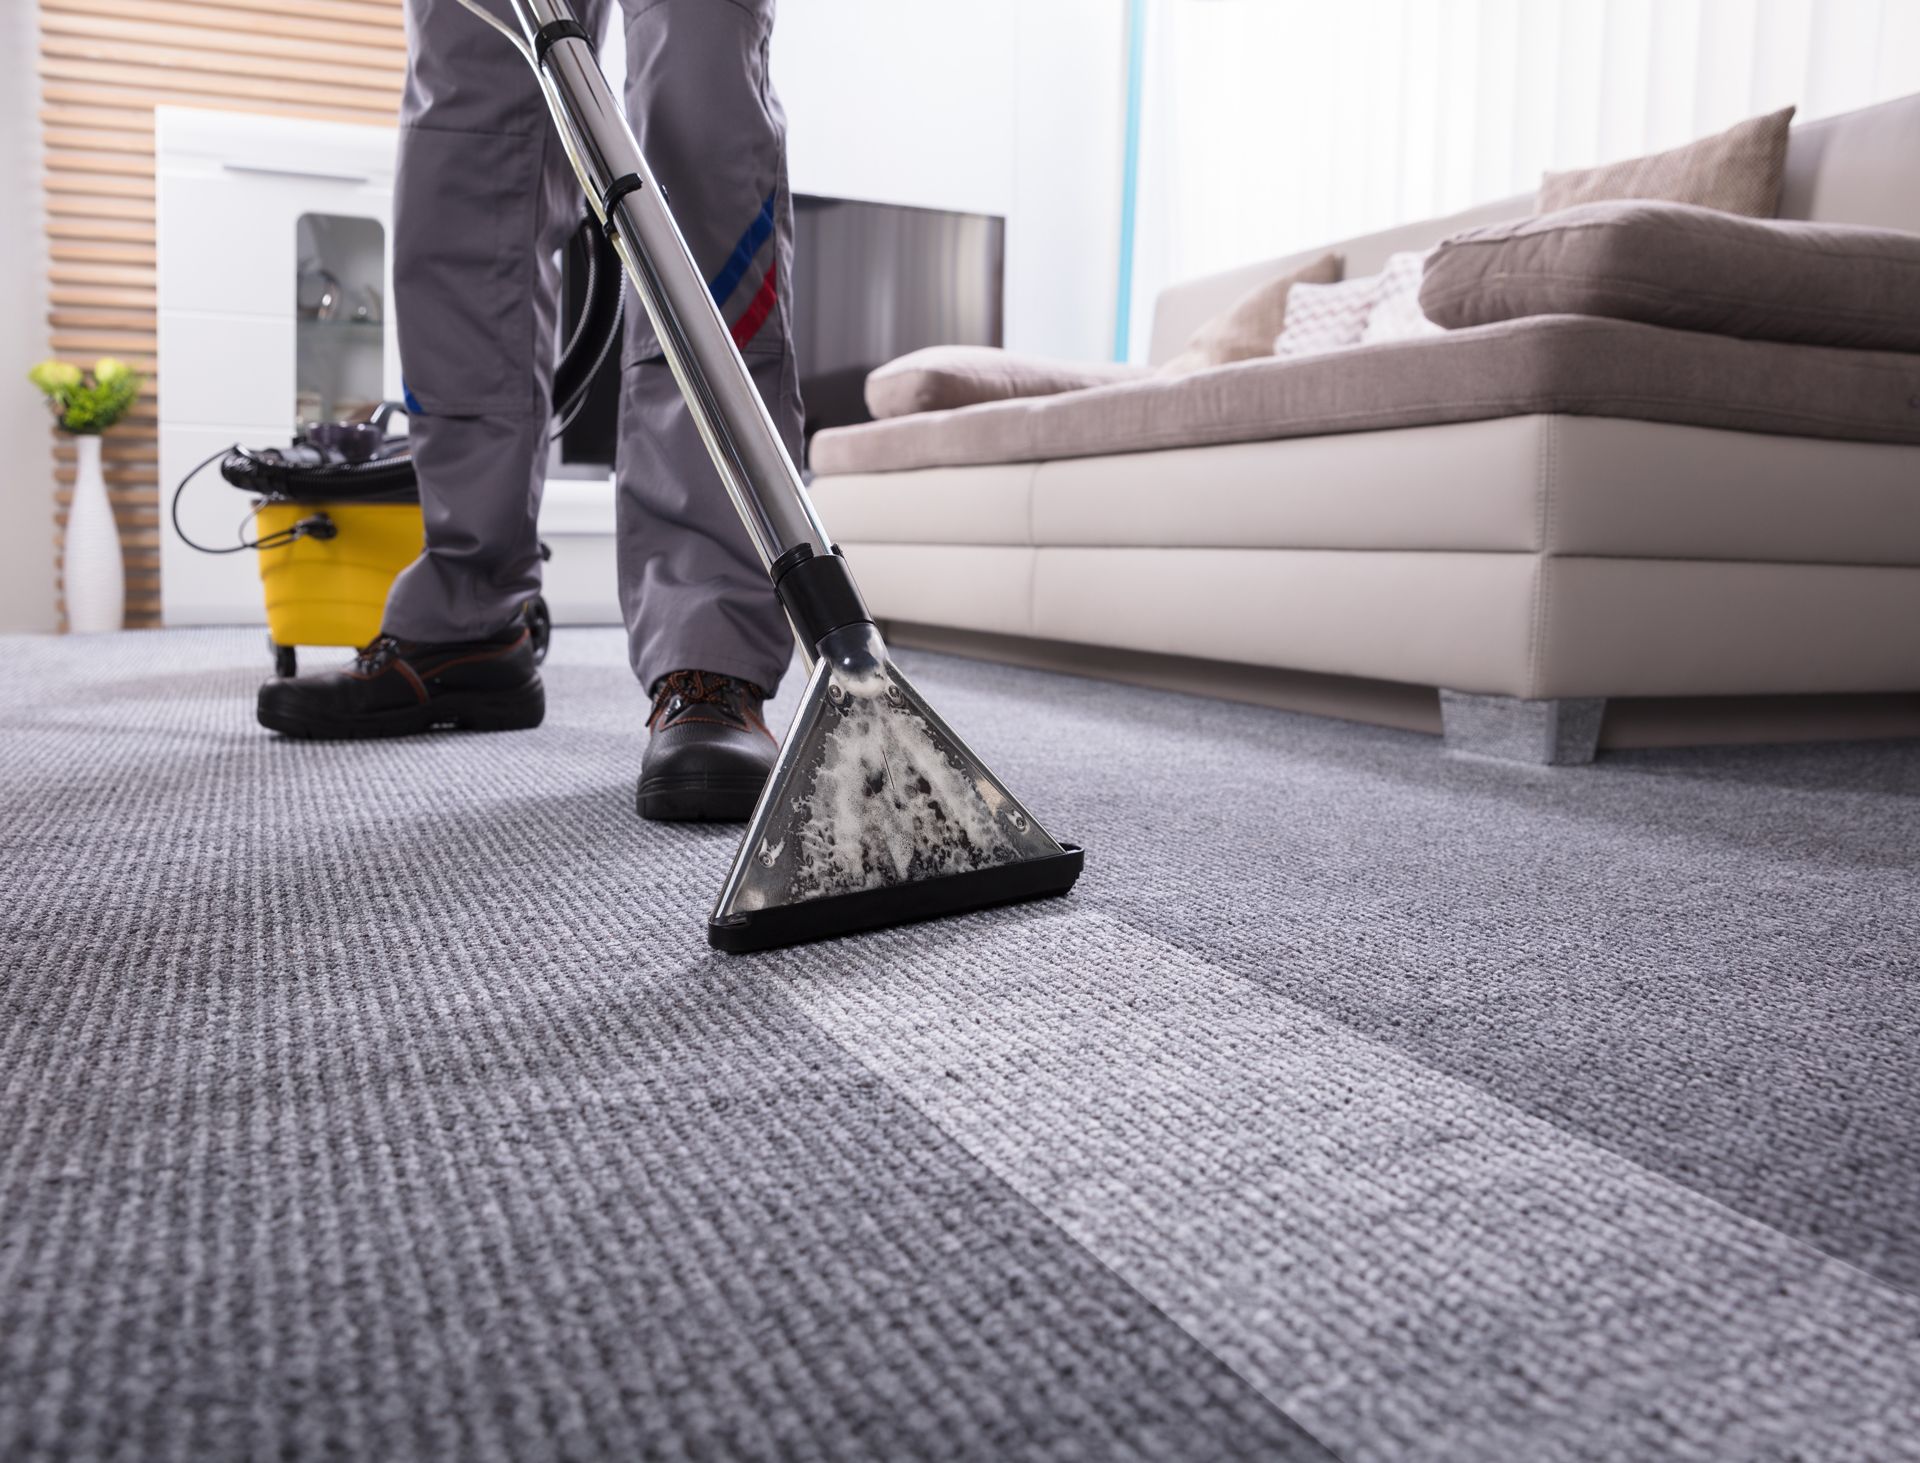 a person is using a vacuum cleaner to clean a rug